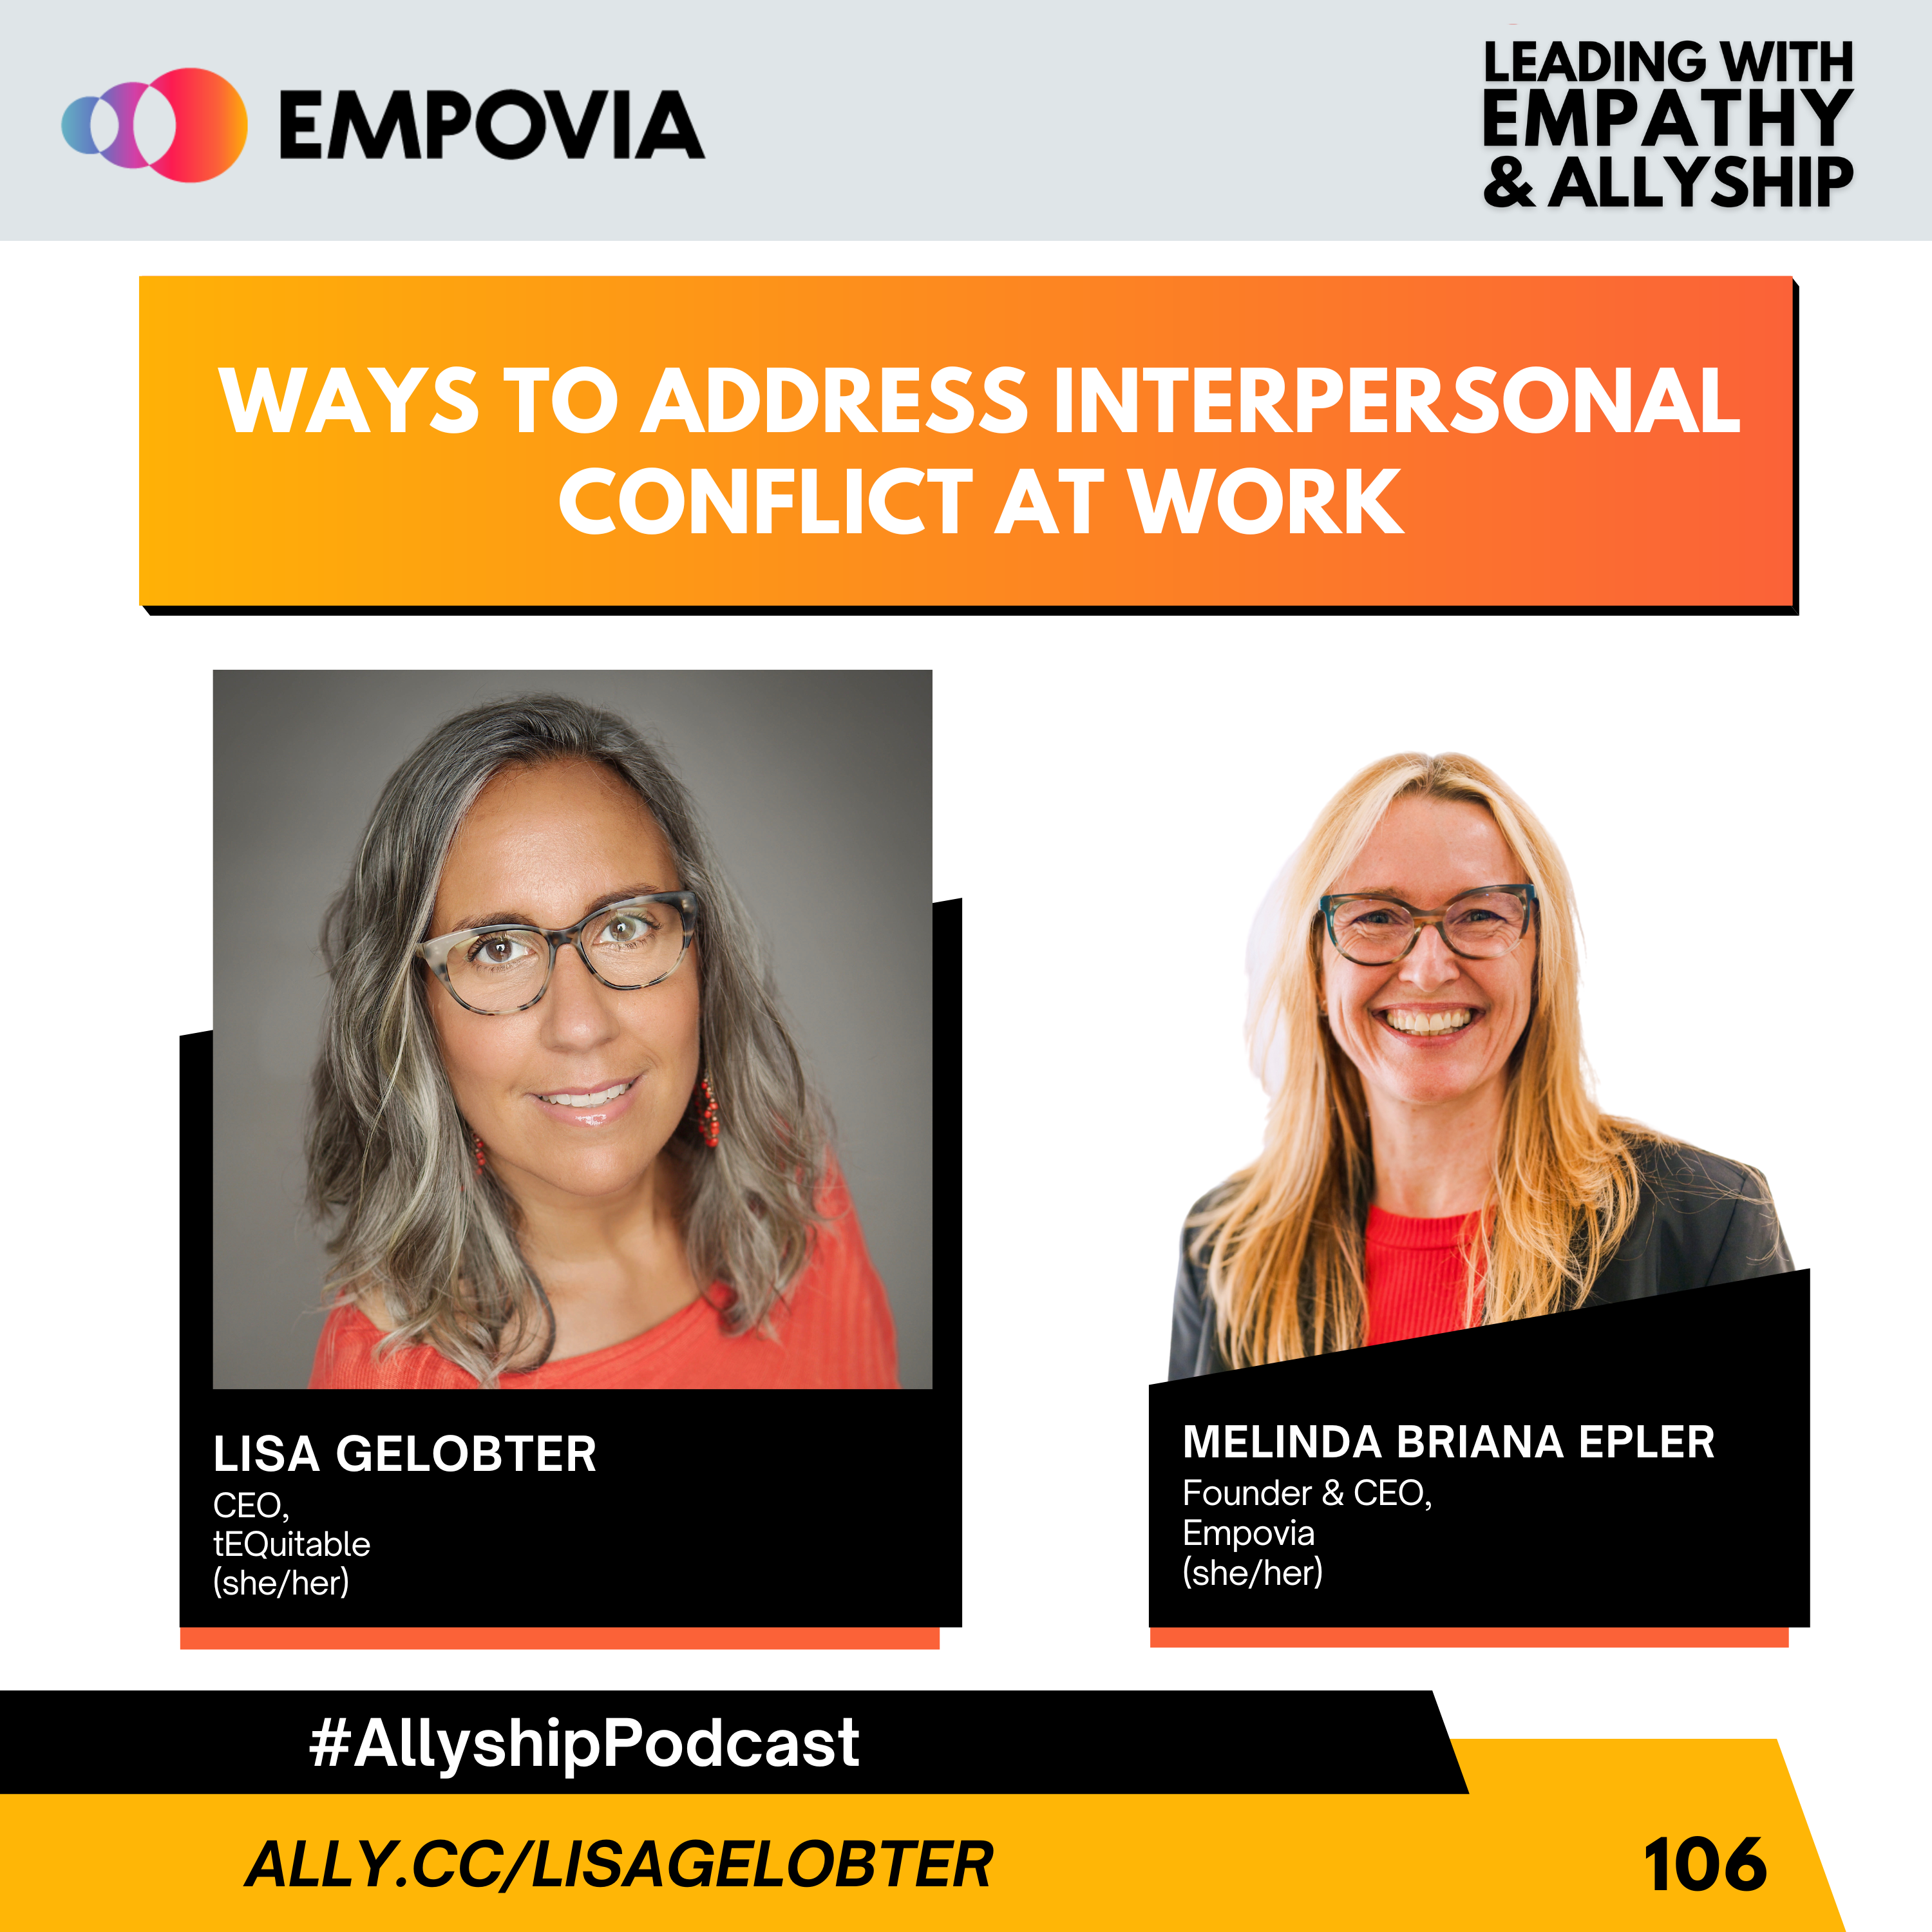 Leading With Empathy & Allyship promo and photos of Lisa Gelobter, a Black woman with long salt and pepper hair, glasses, yellow/orange beaded earrings, and coral shirt; and host Melinda Briana Epler, a White woman with blonde and red hair, glasses, red shirt, and black jacket.